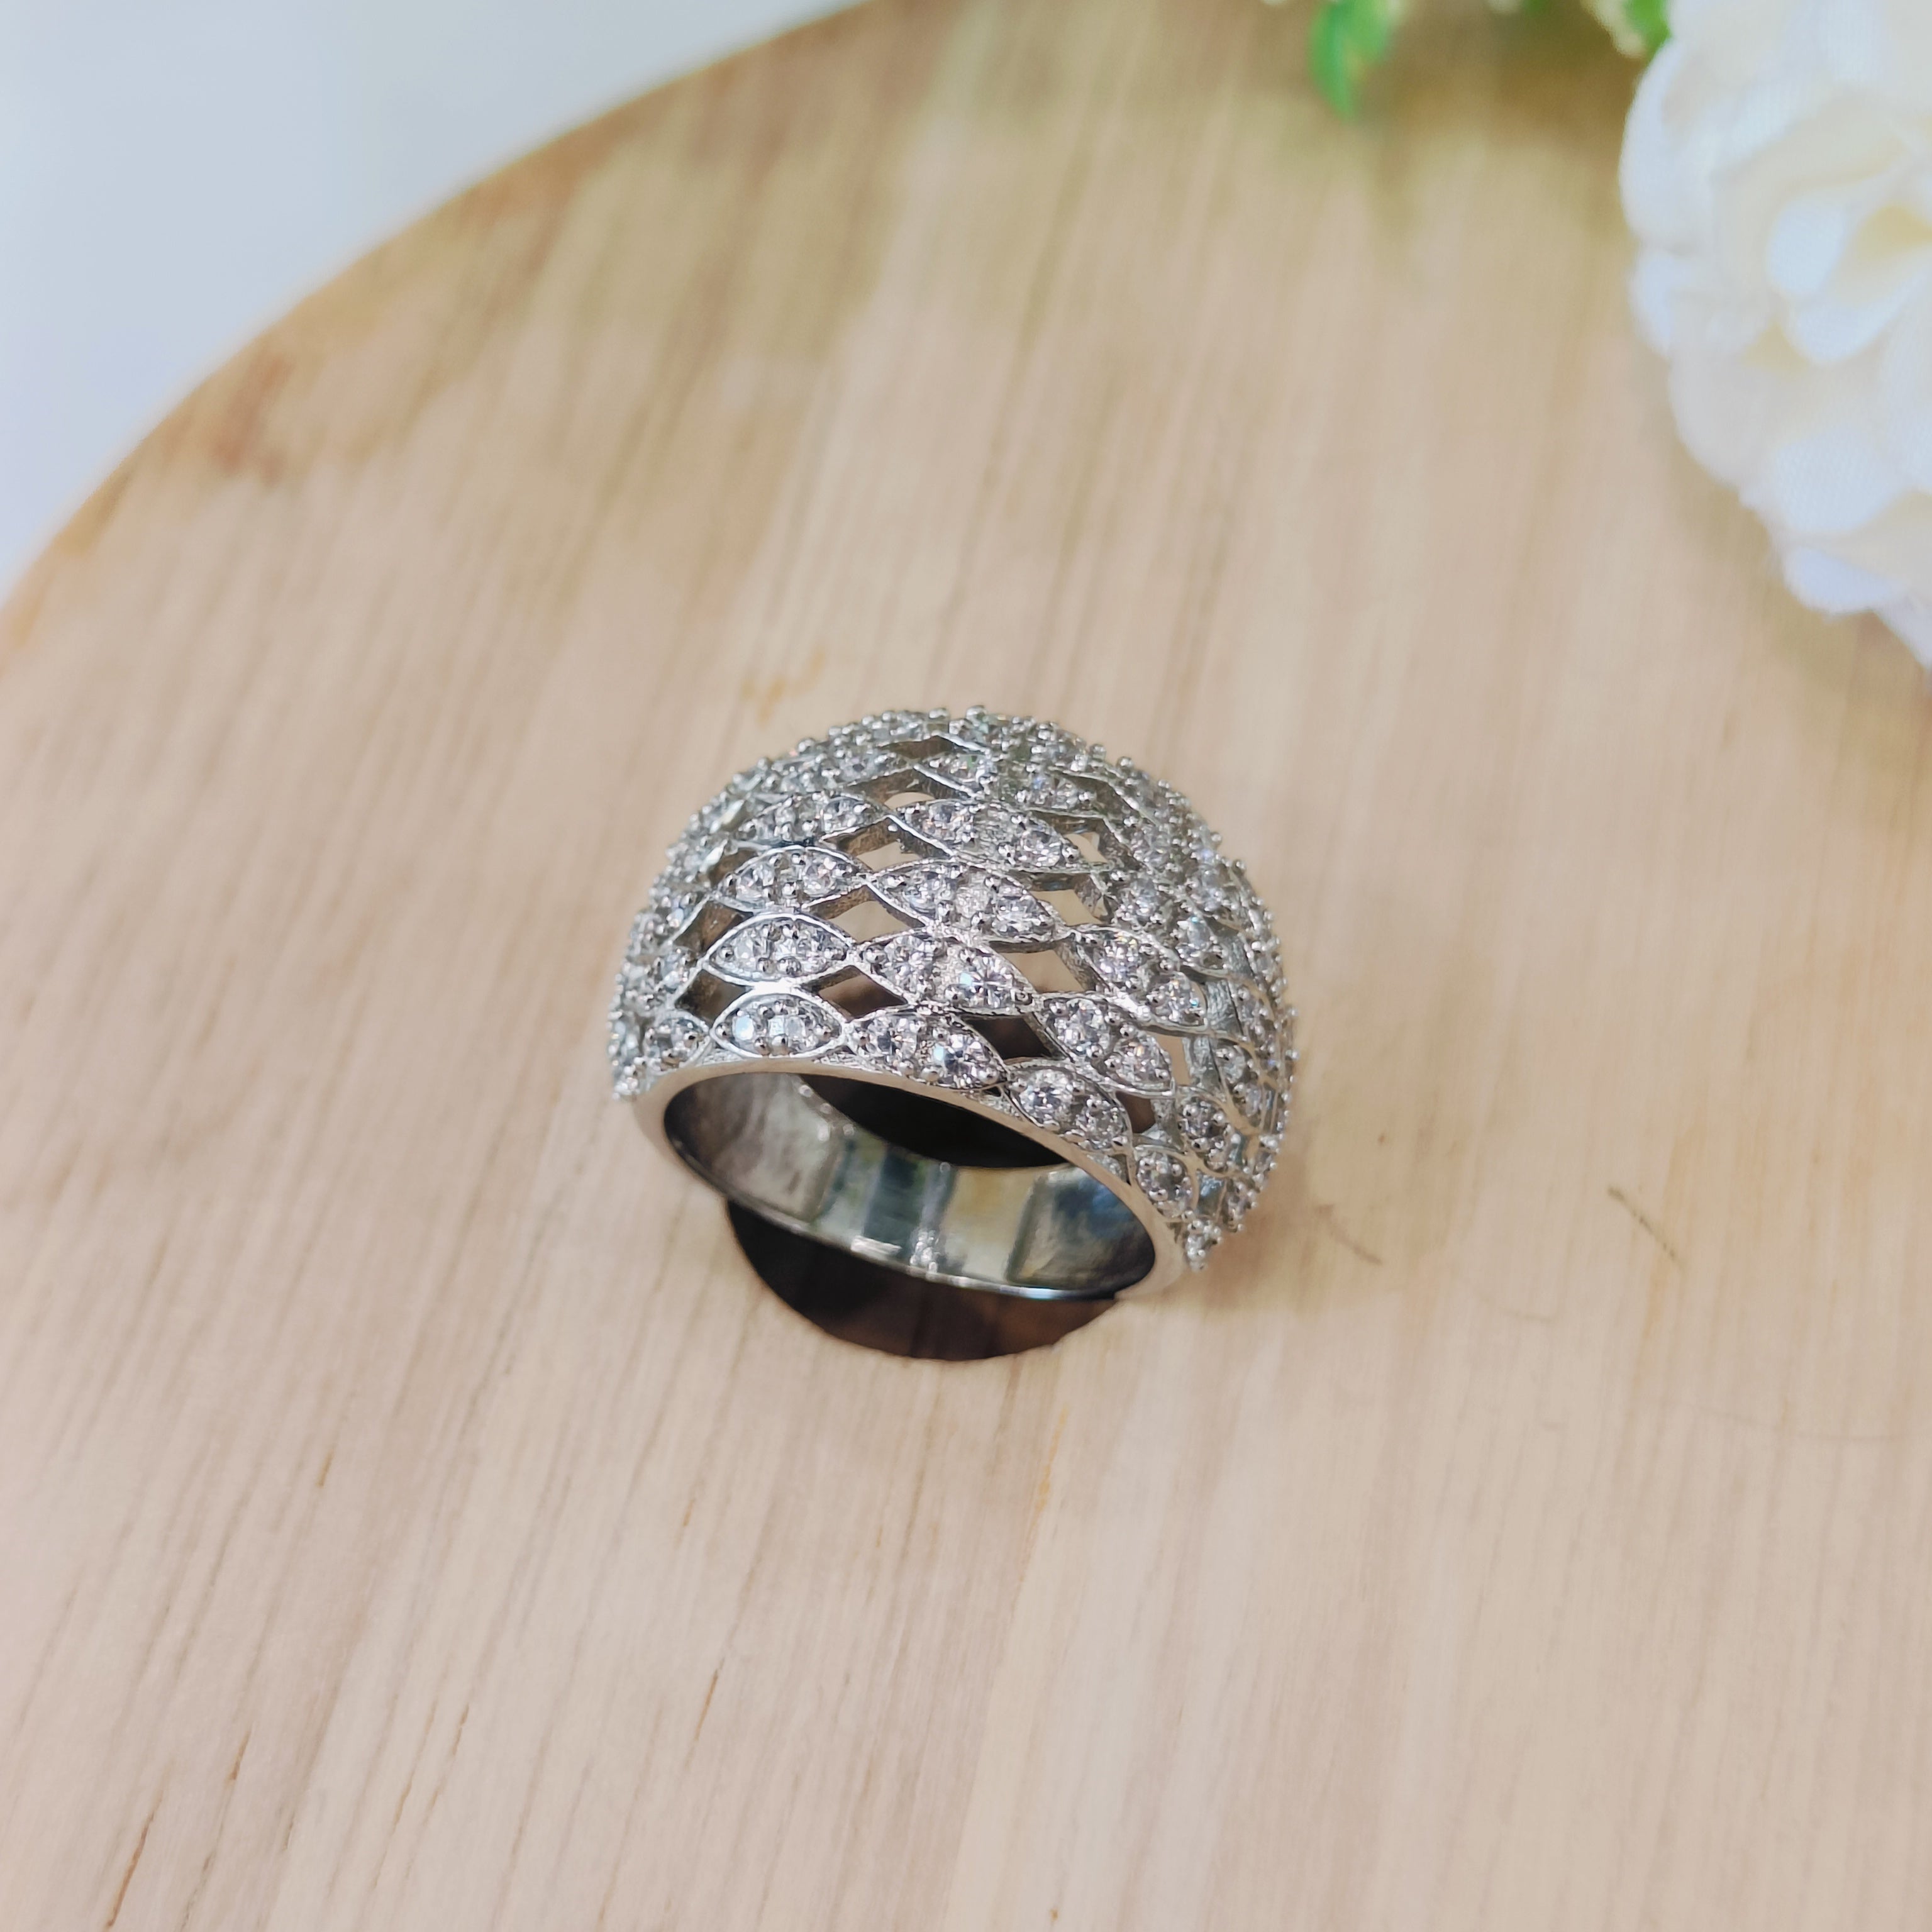 Vs sterling silver cocktail ring 173